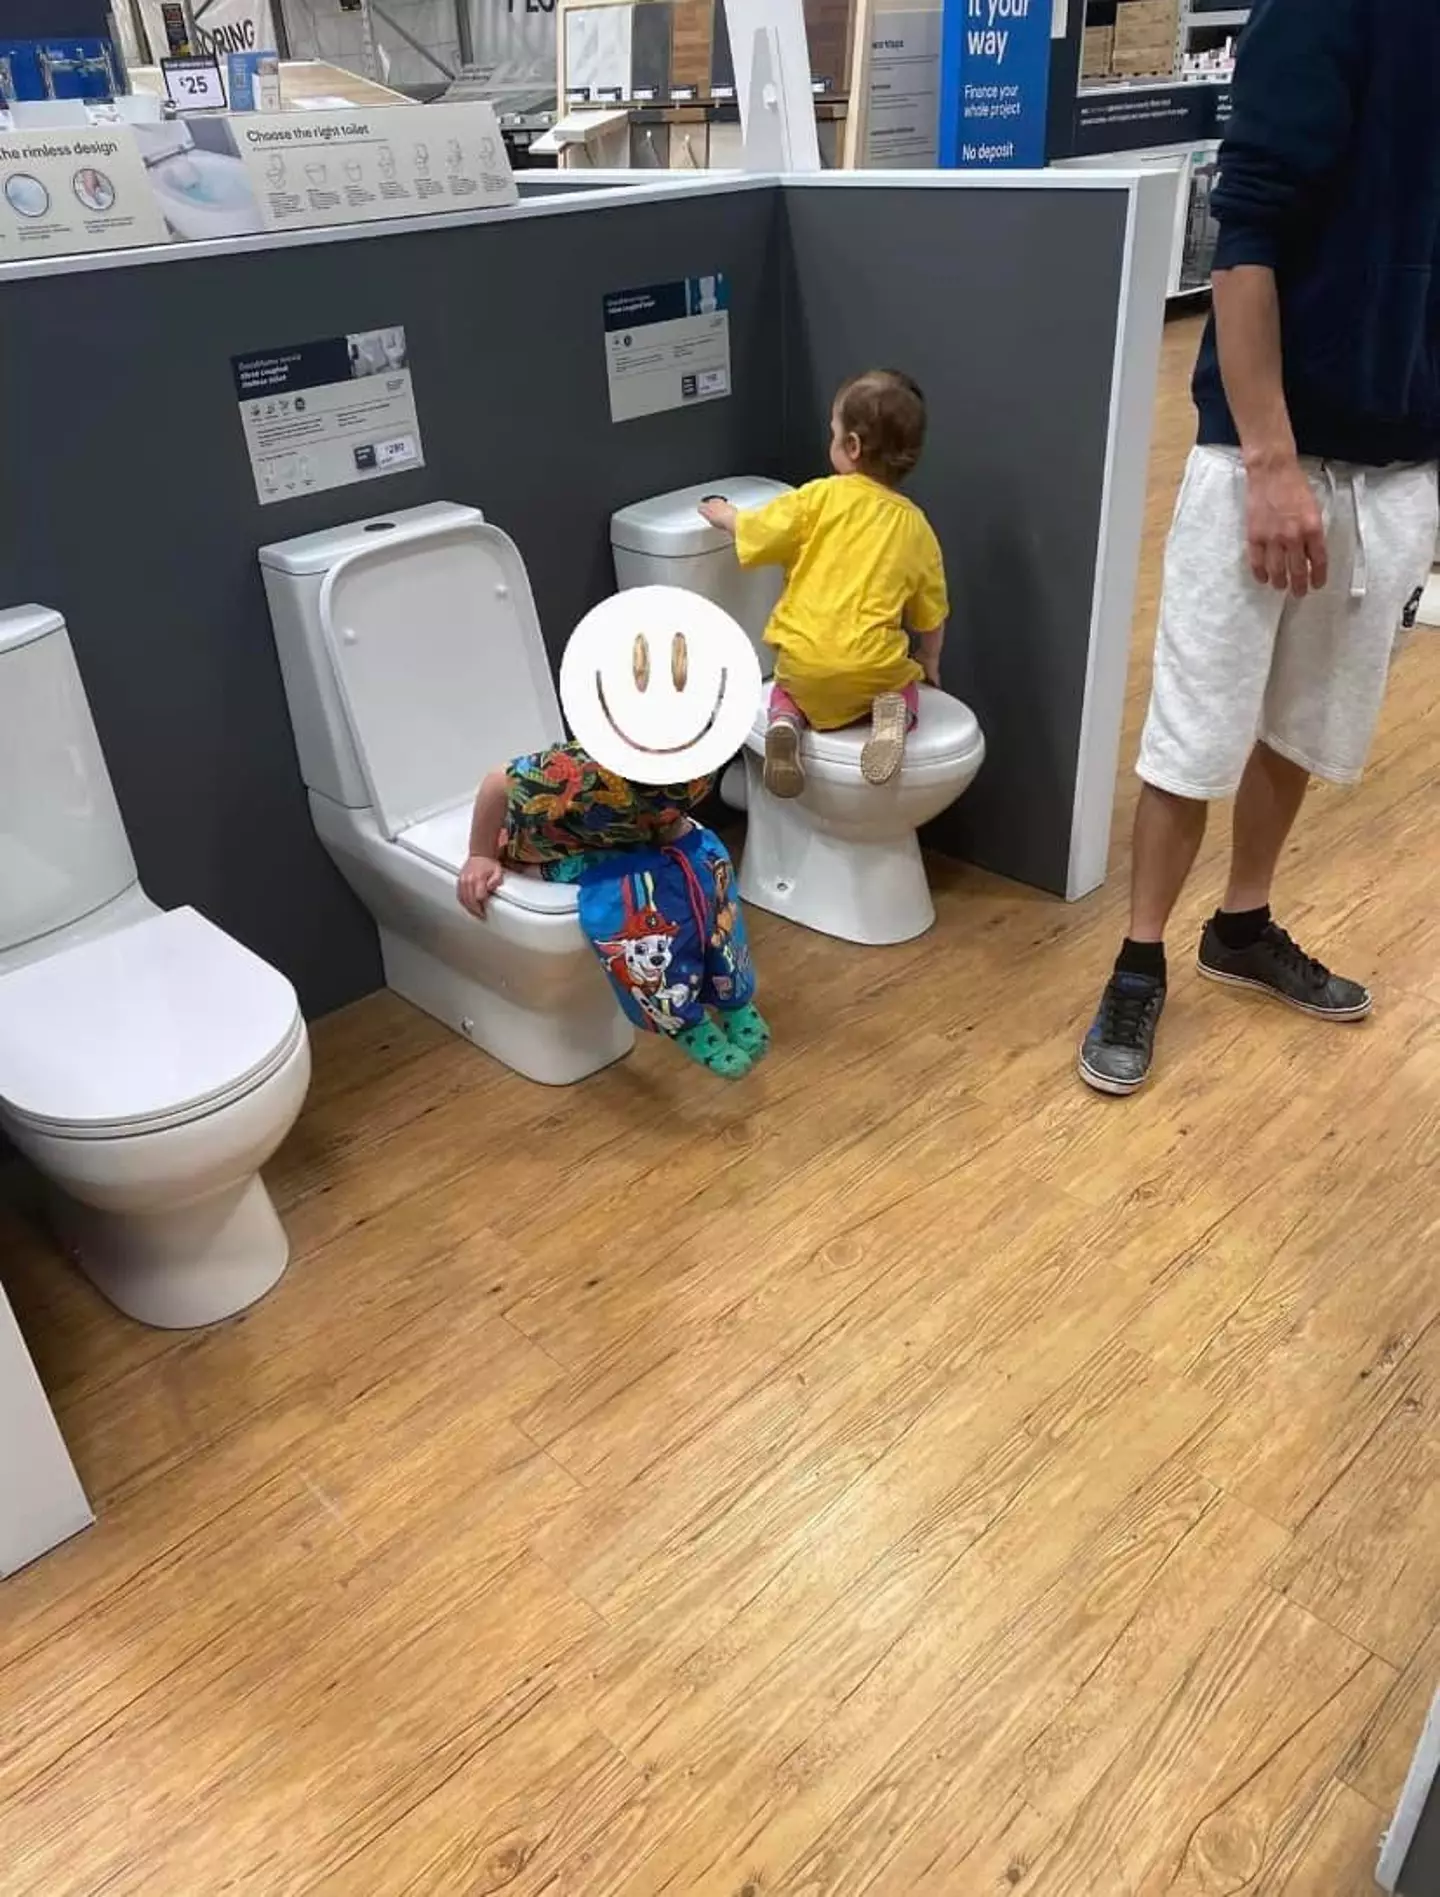 Caroline Akhtar and her partner Azzy's son used a display toilet while their backs were turned.